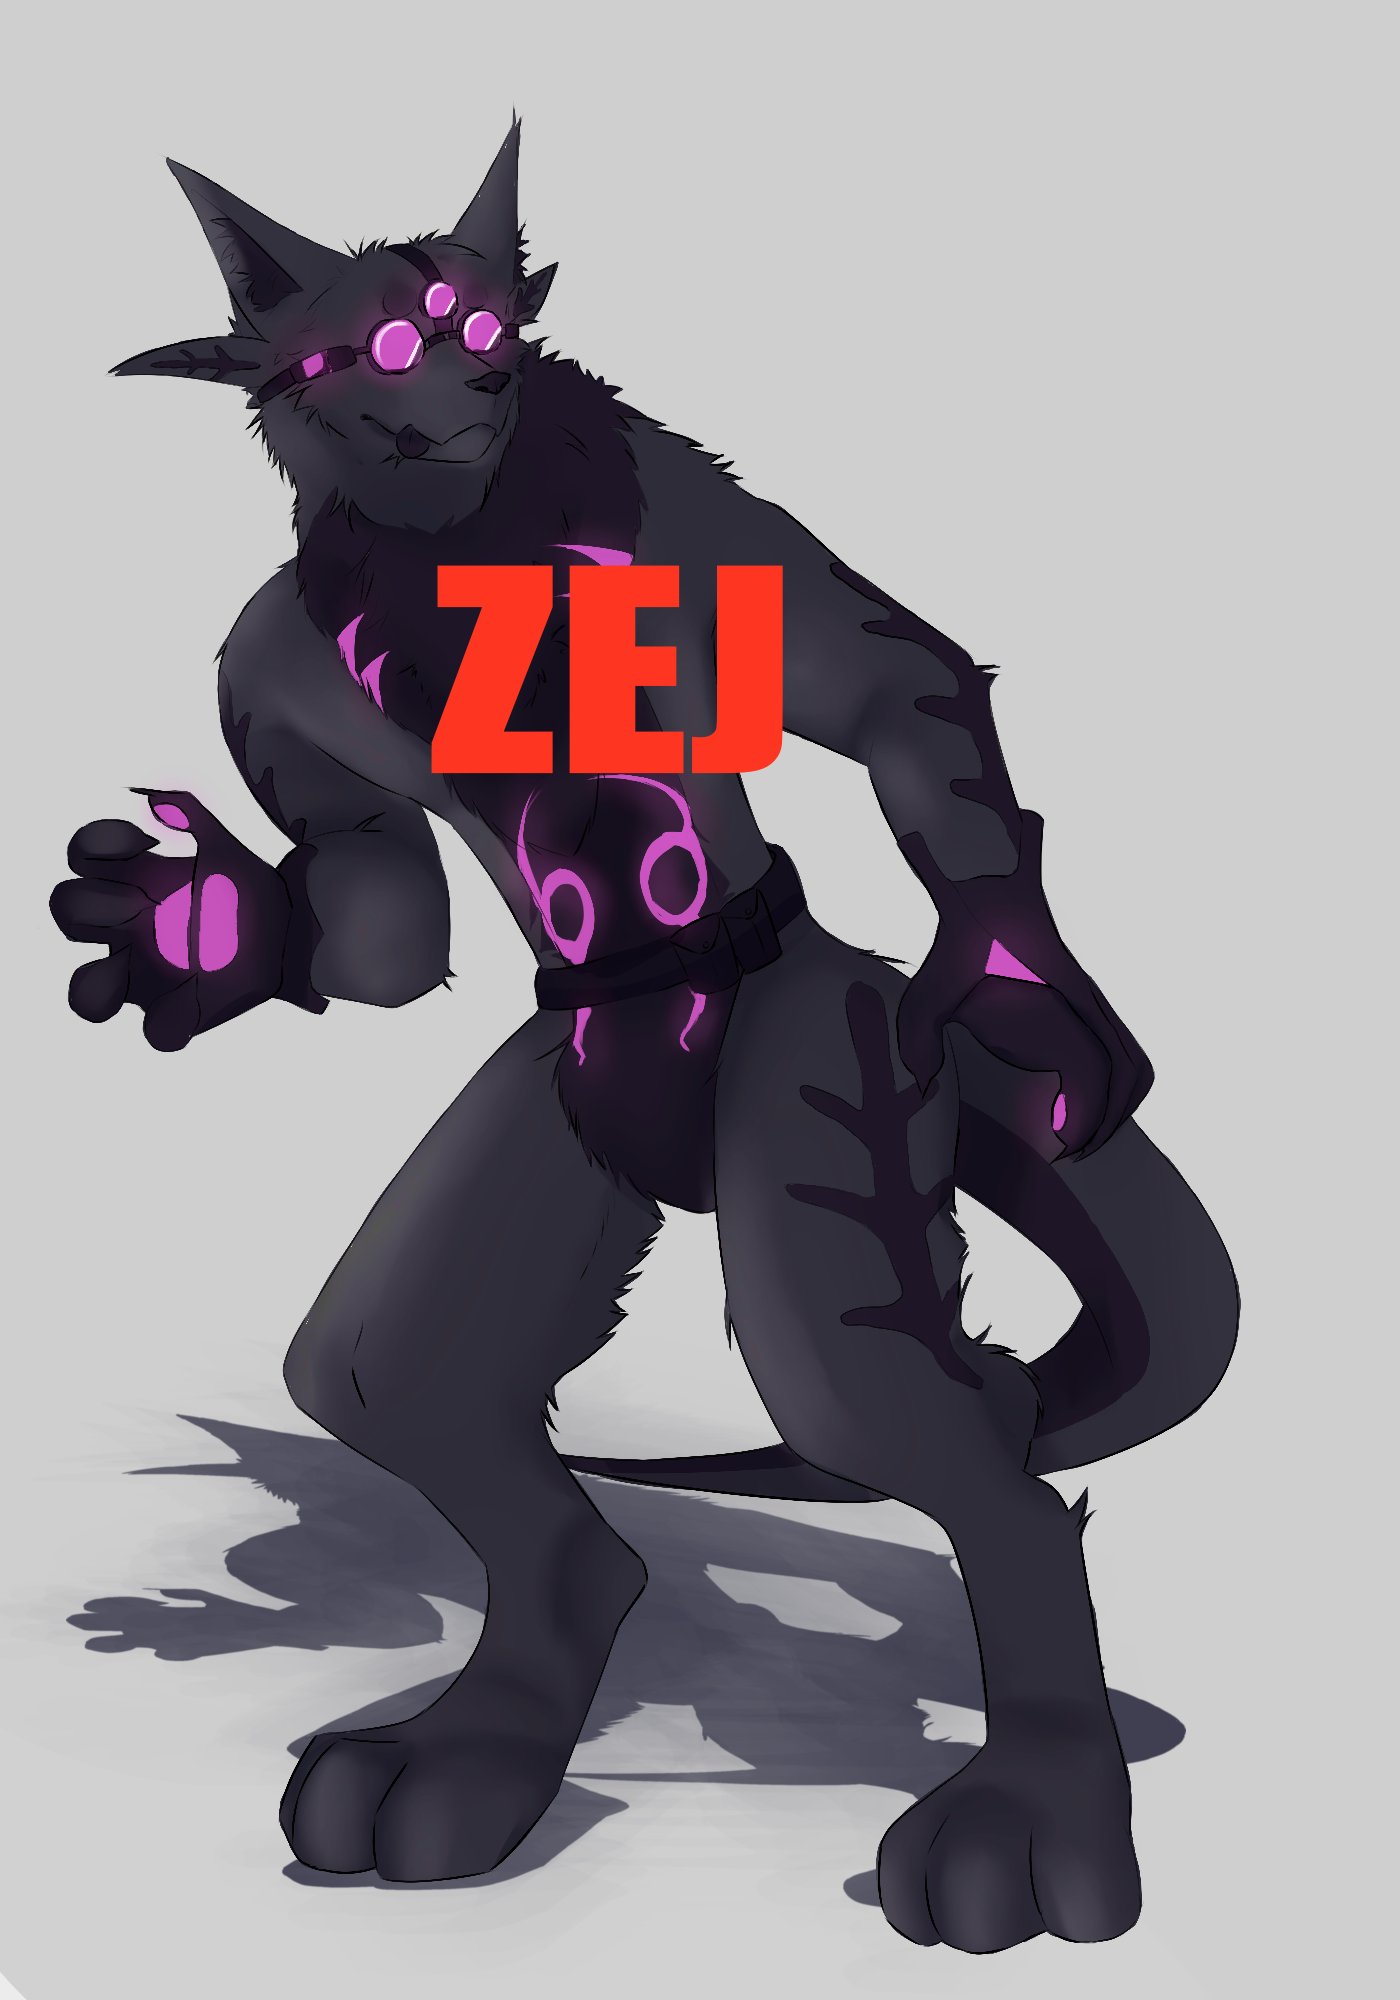 Zej on X: Night crawler drawing from kaiju paradise. It was a 1.5k R$  commission from someone on discord 👍 #furry #kaijuparadise #Commission  #art #nightcrawler #robloxcommission  / X